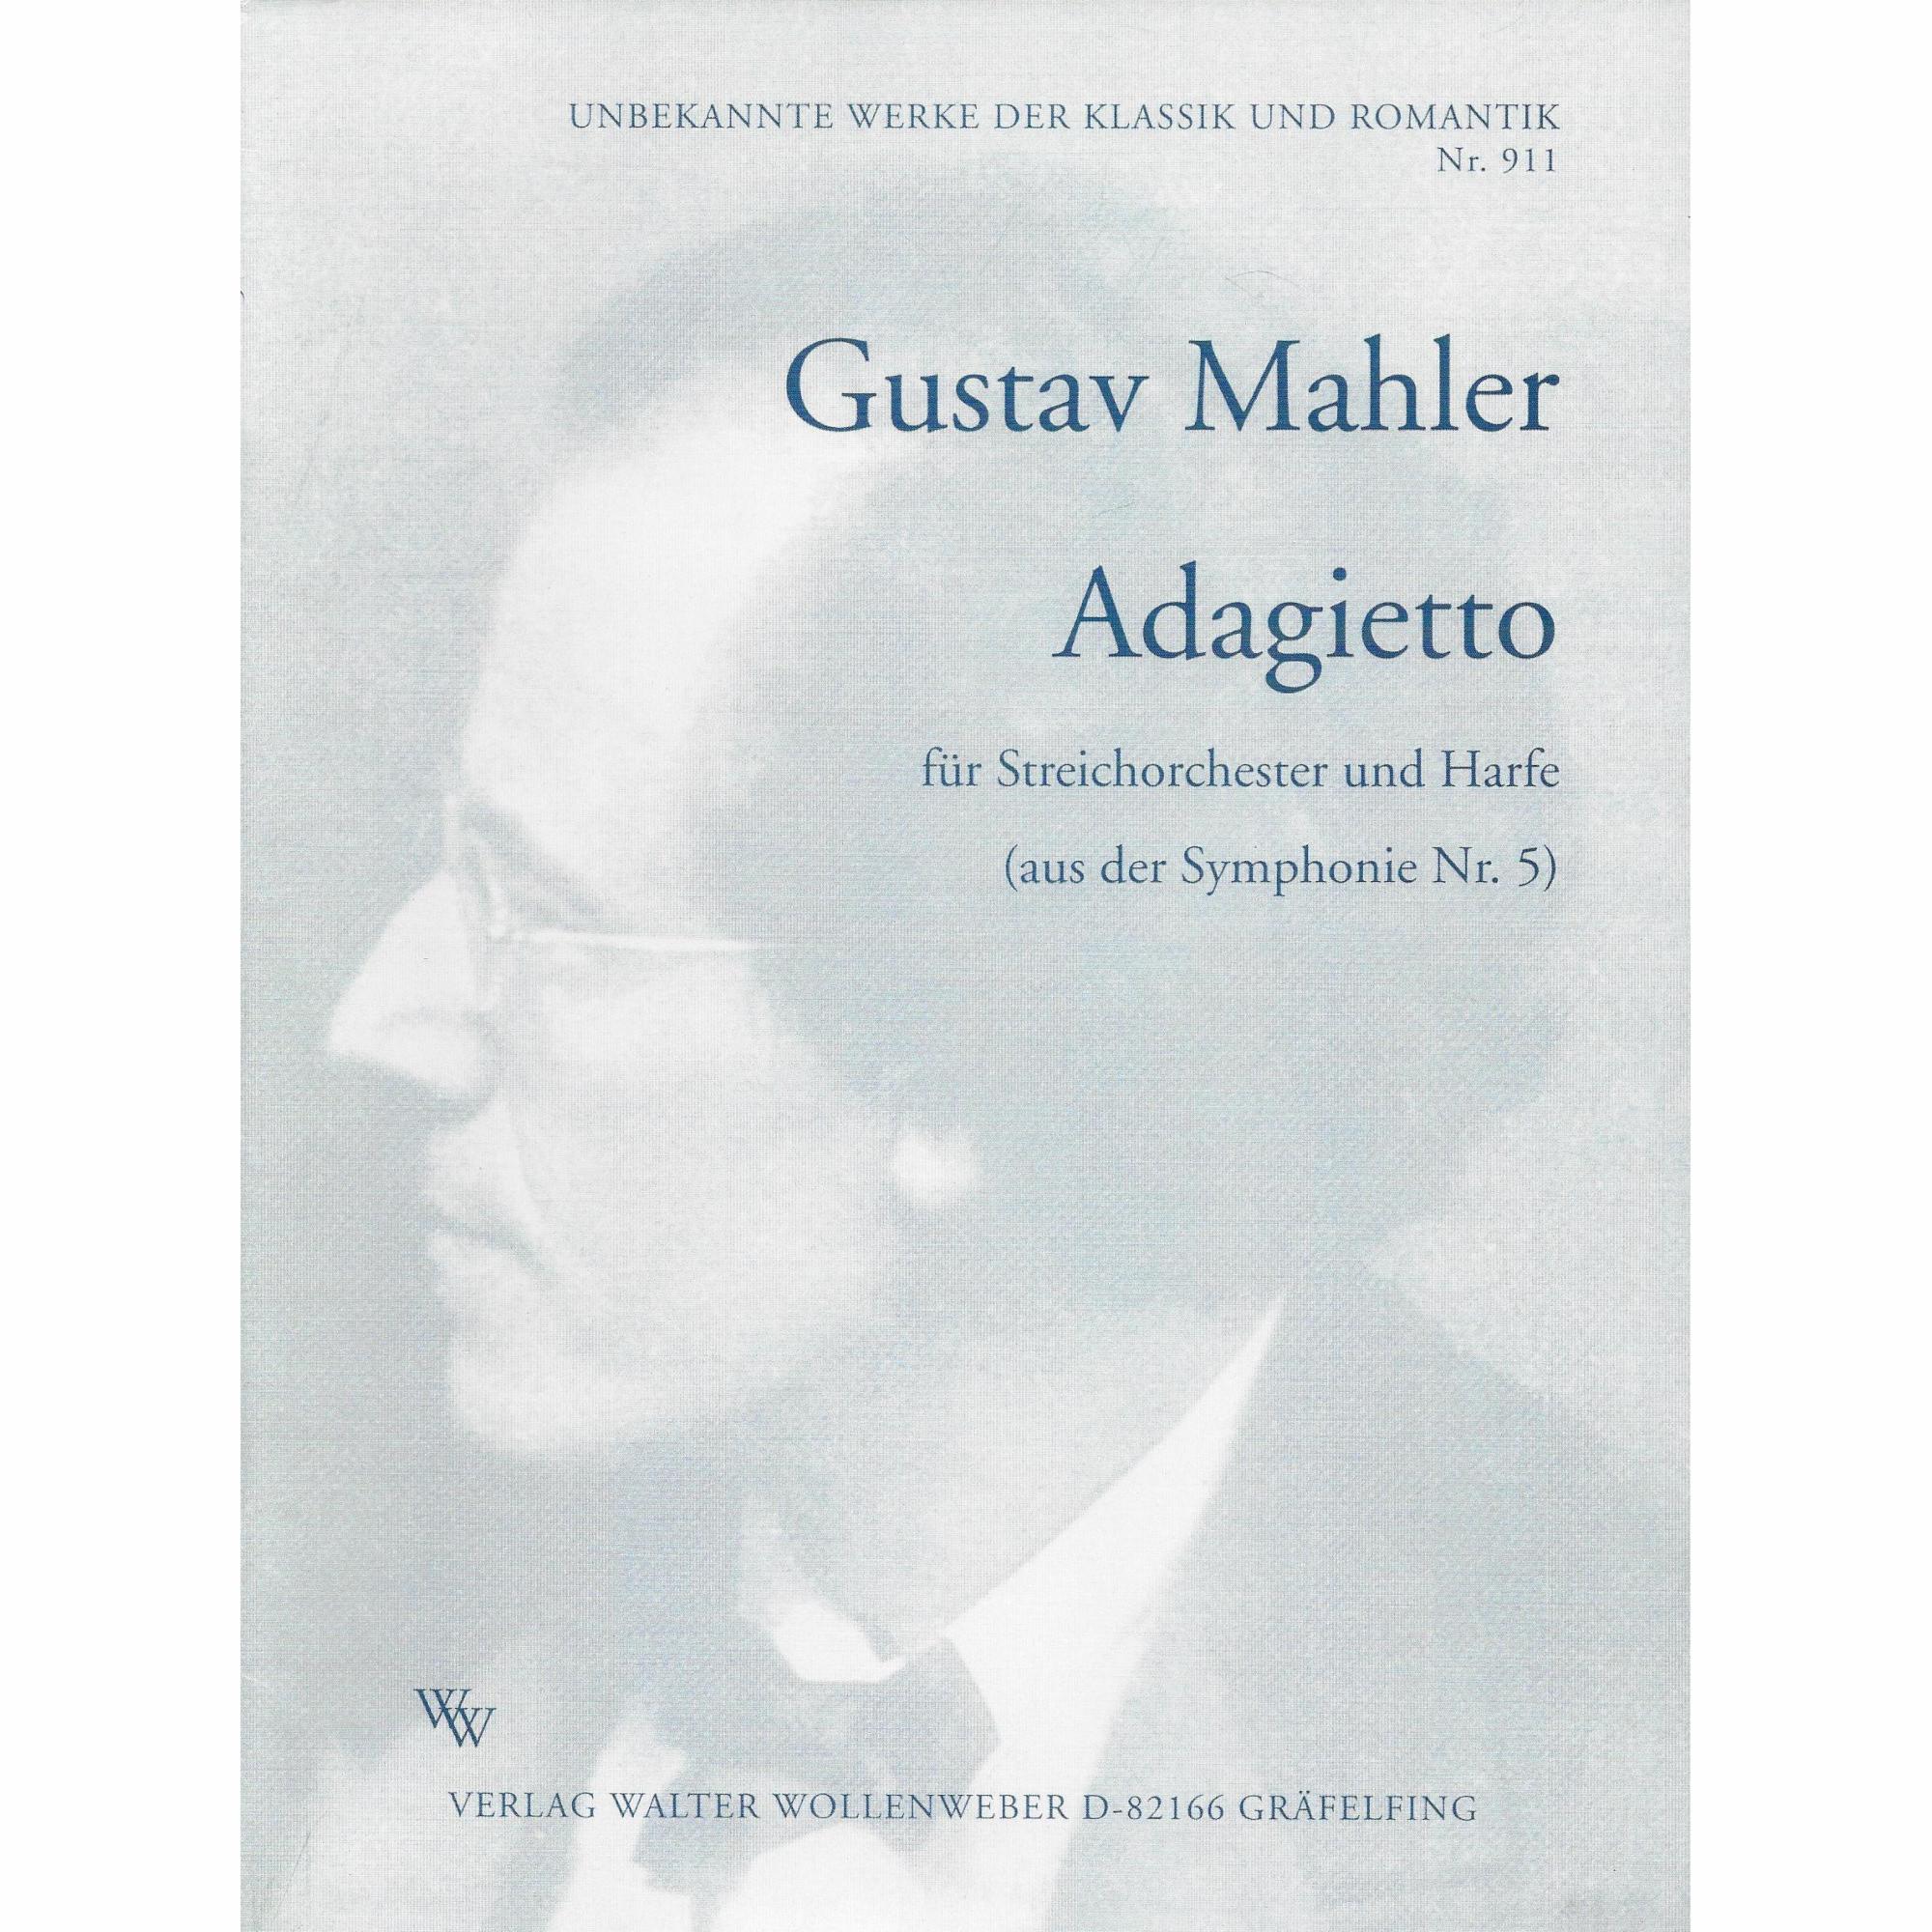 Mahler -- Adagietto from Symphony No. 5 for String Orchestra and Harp